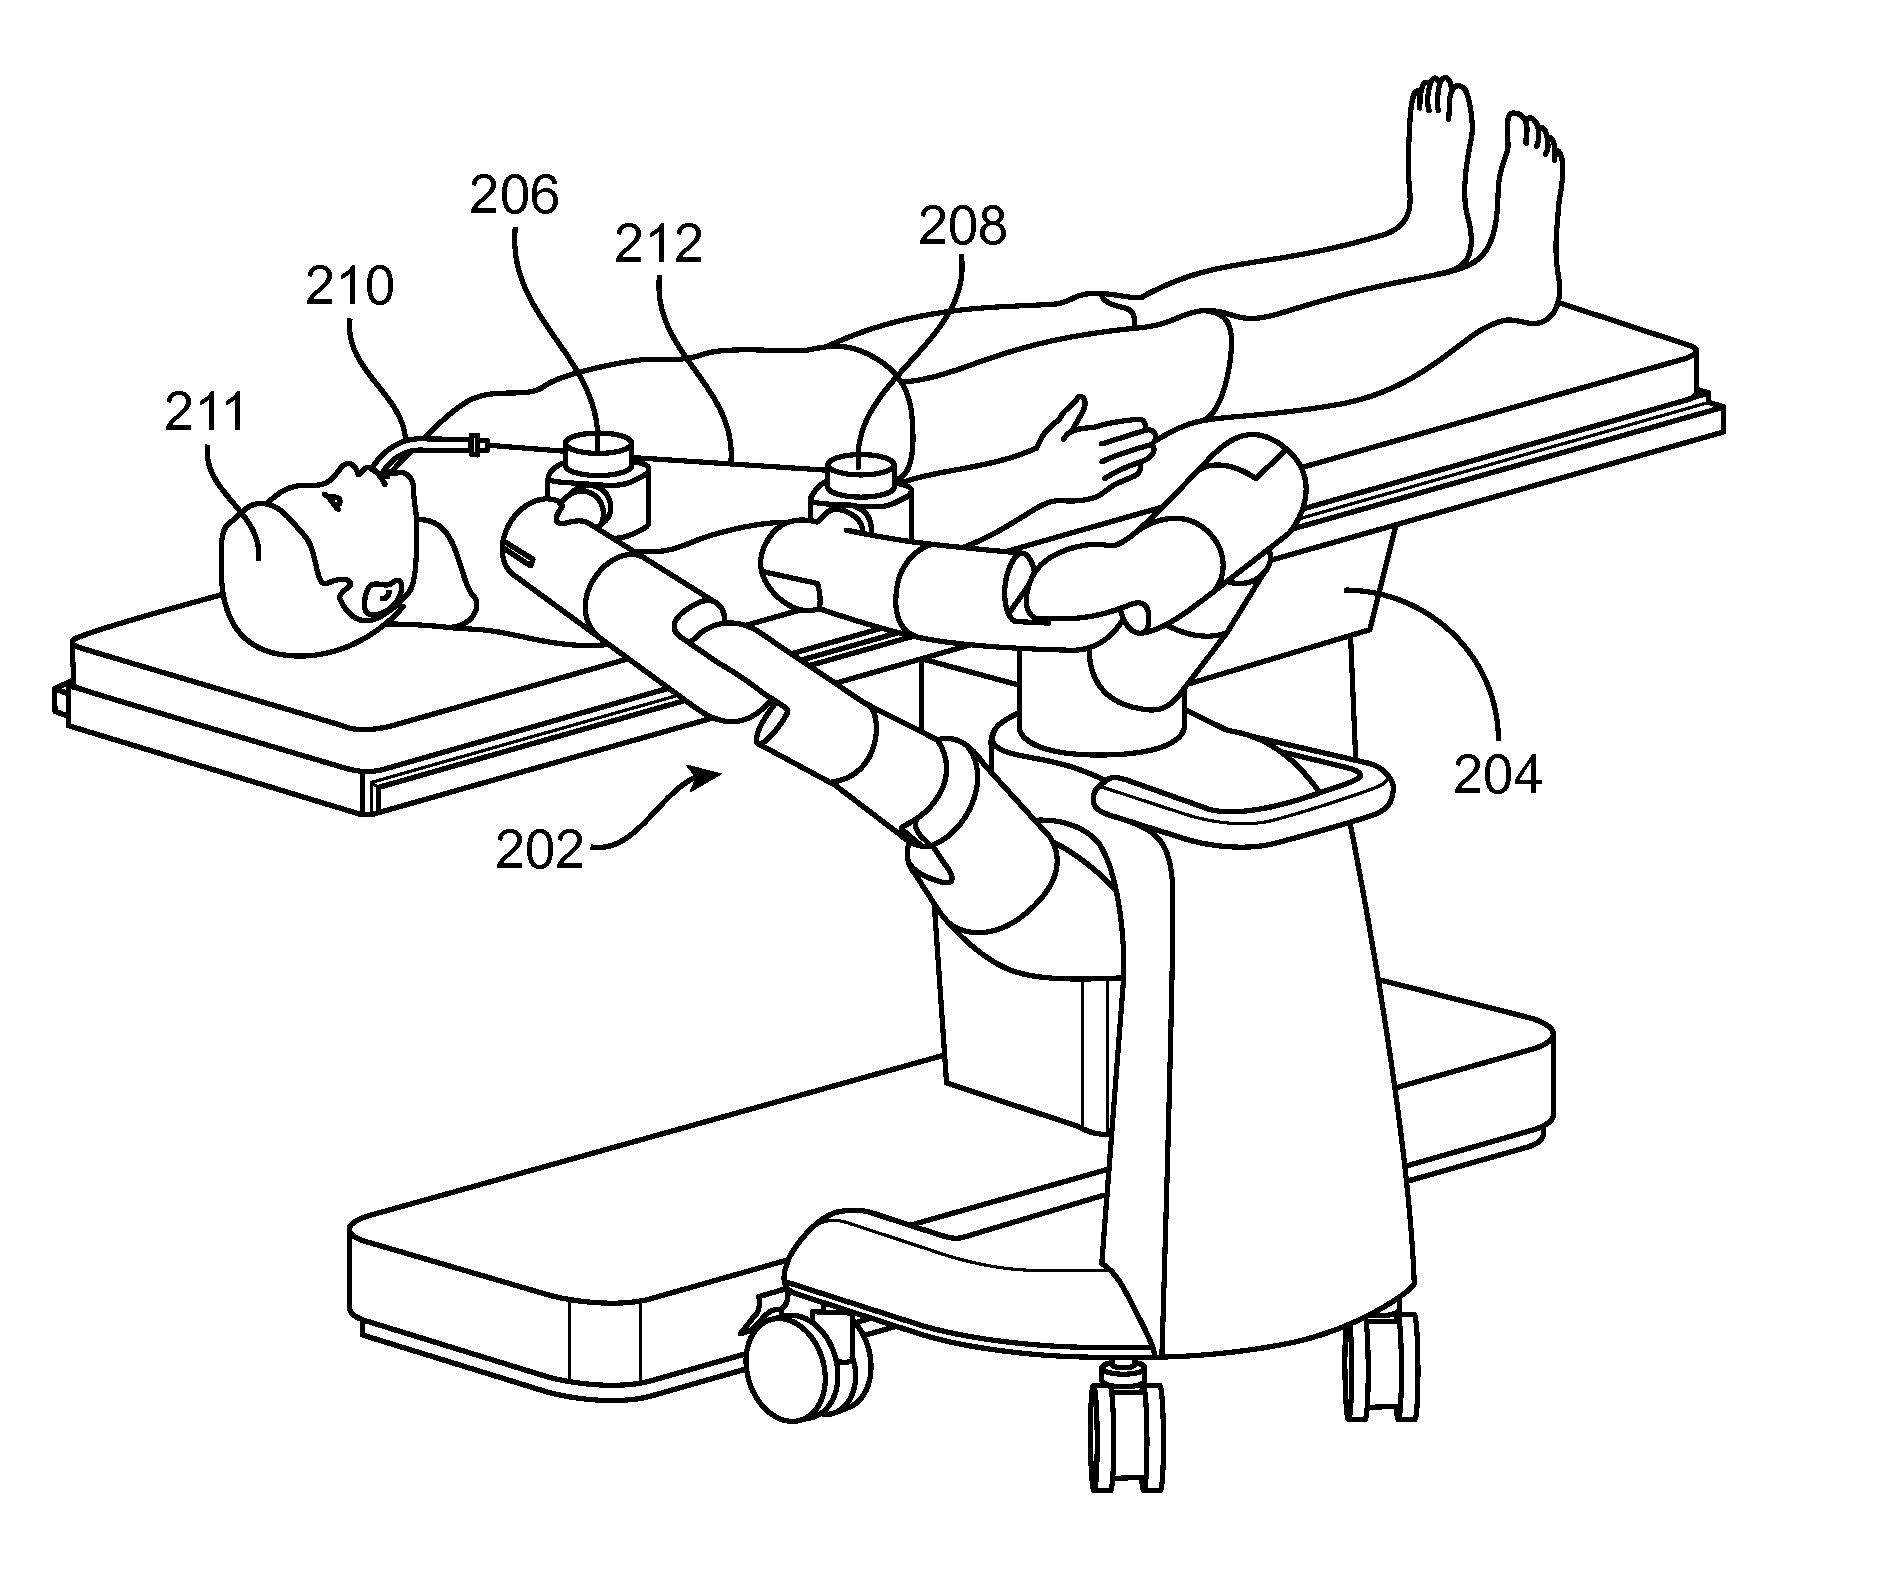 Endoscopic device with double-helical lumen design